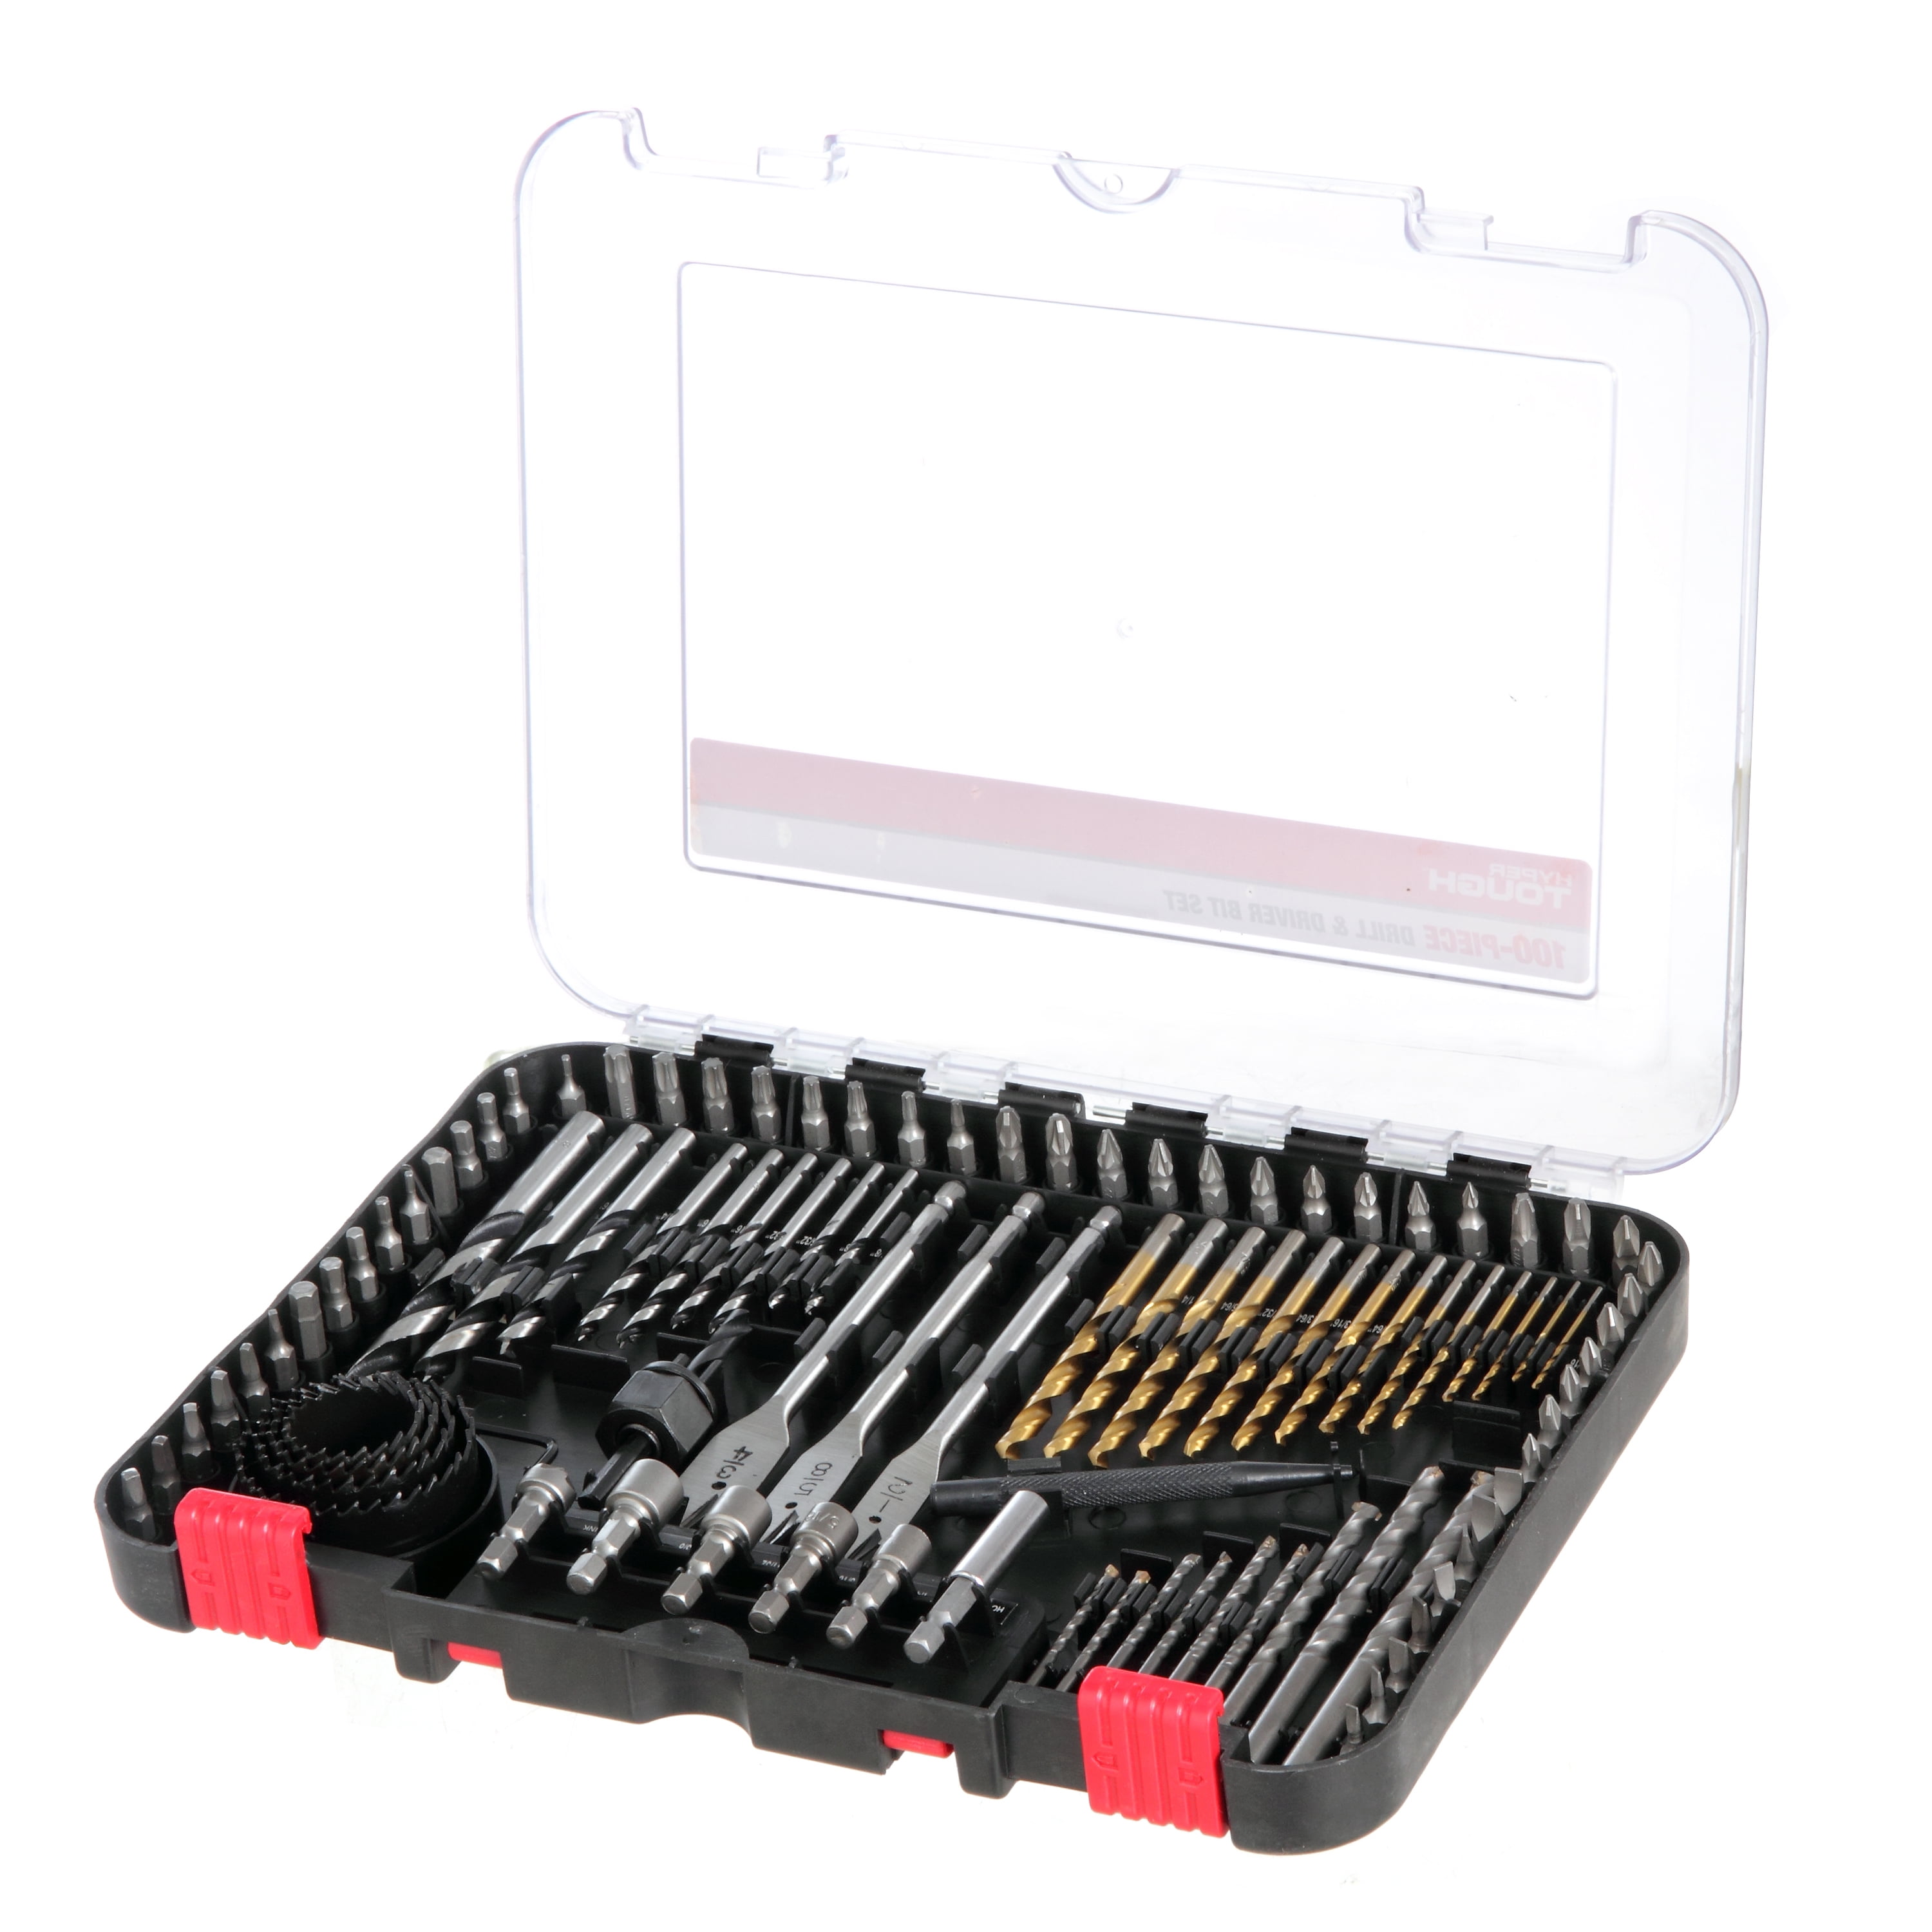 AMTECH 253 PIECE ASSORTED DRILL AND SCREWDRIVER BIT SET TOOL KIT 3 YEAR WARRANTY 